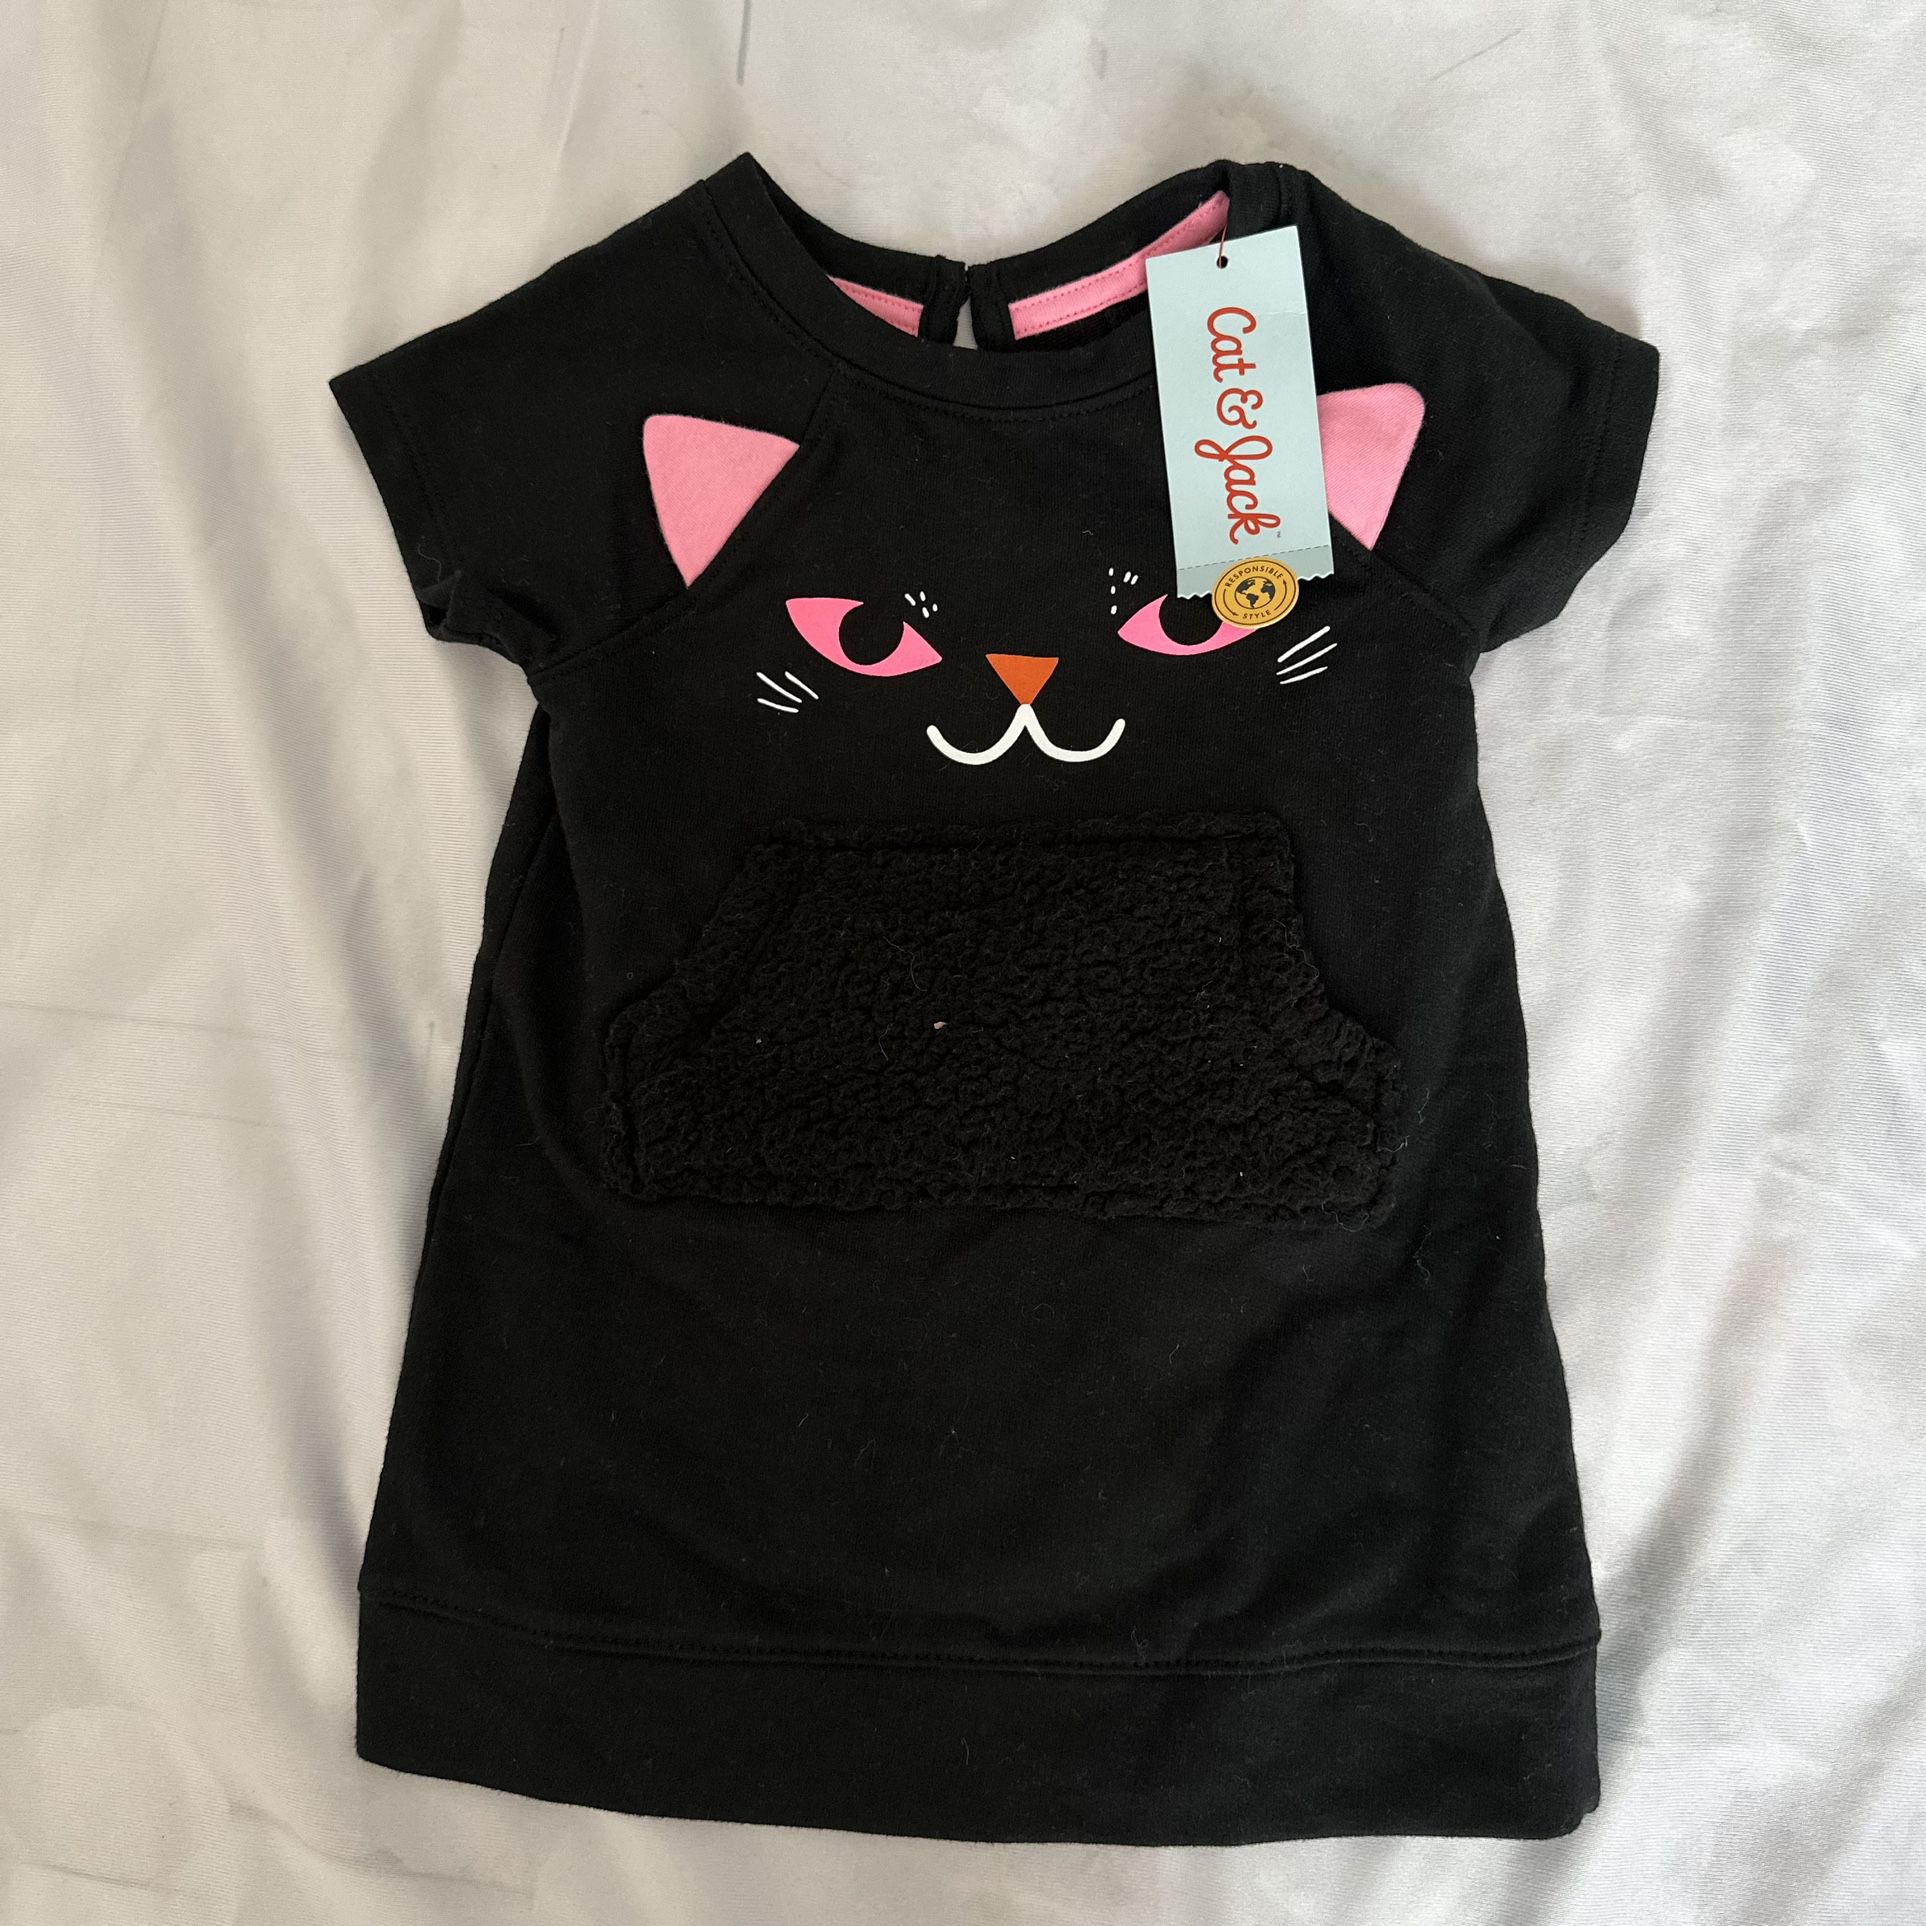 CAT DRESS BRAND NEW WITH TAGS NWT 12 MONTHS 9-12 MONTHS